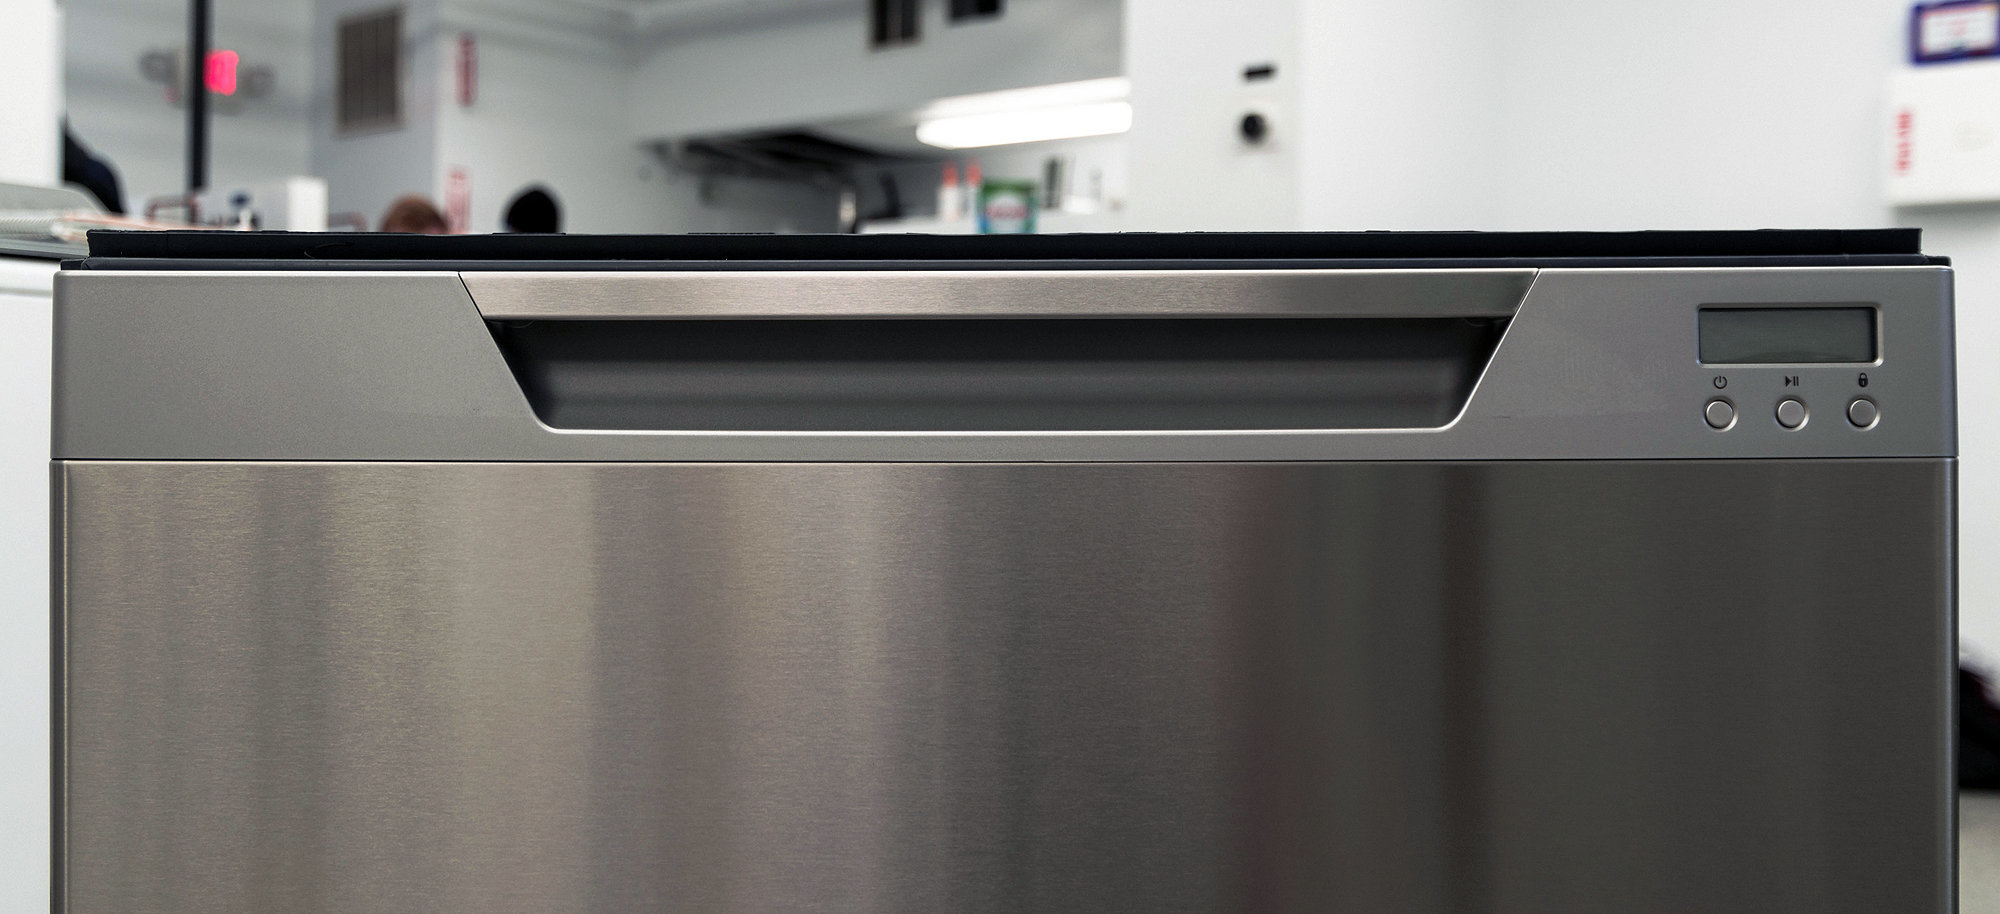 fisher and paykel dishwasher reviews